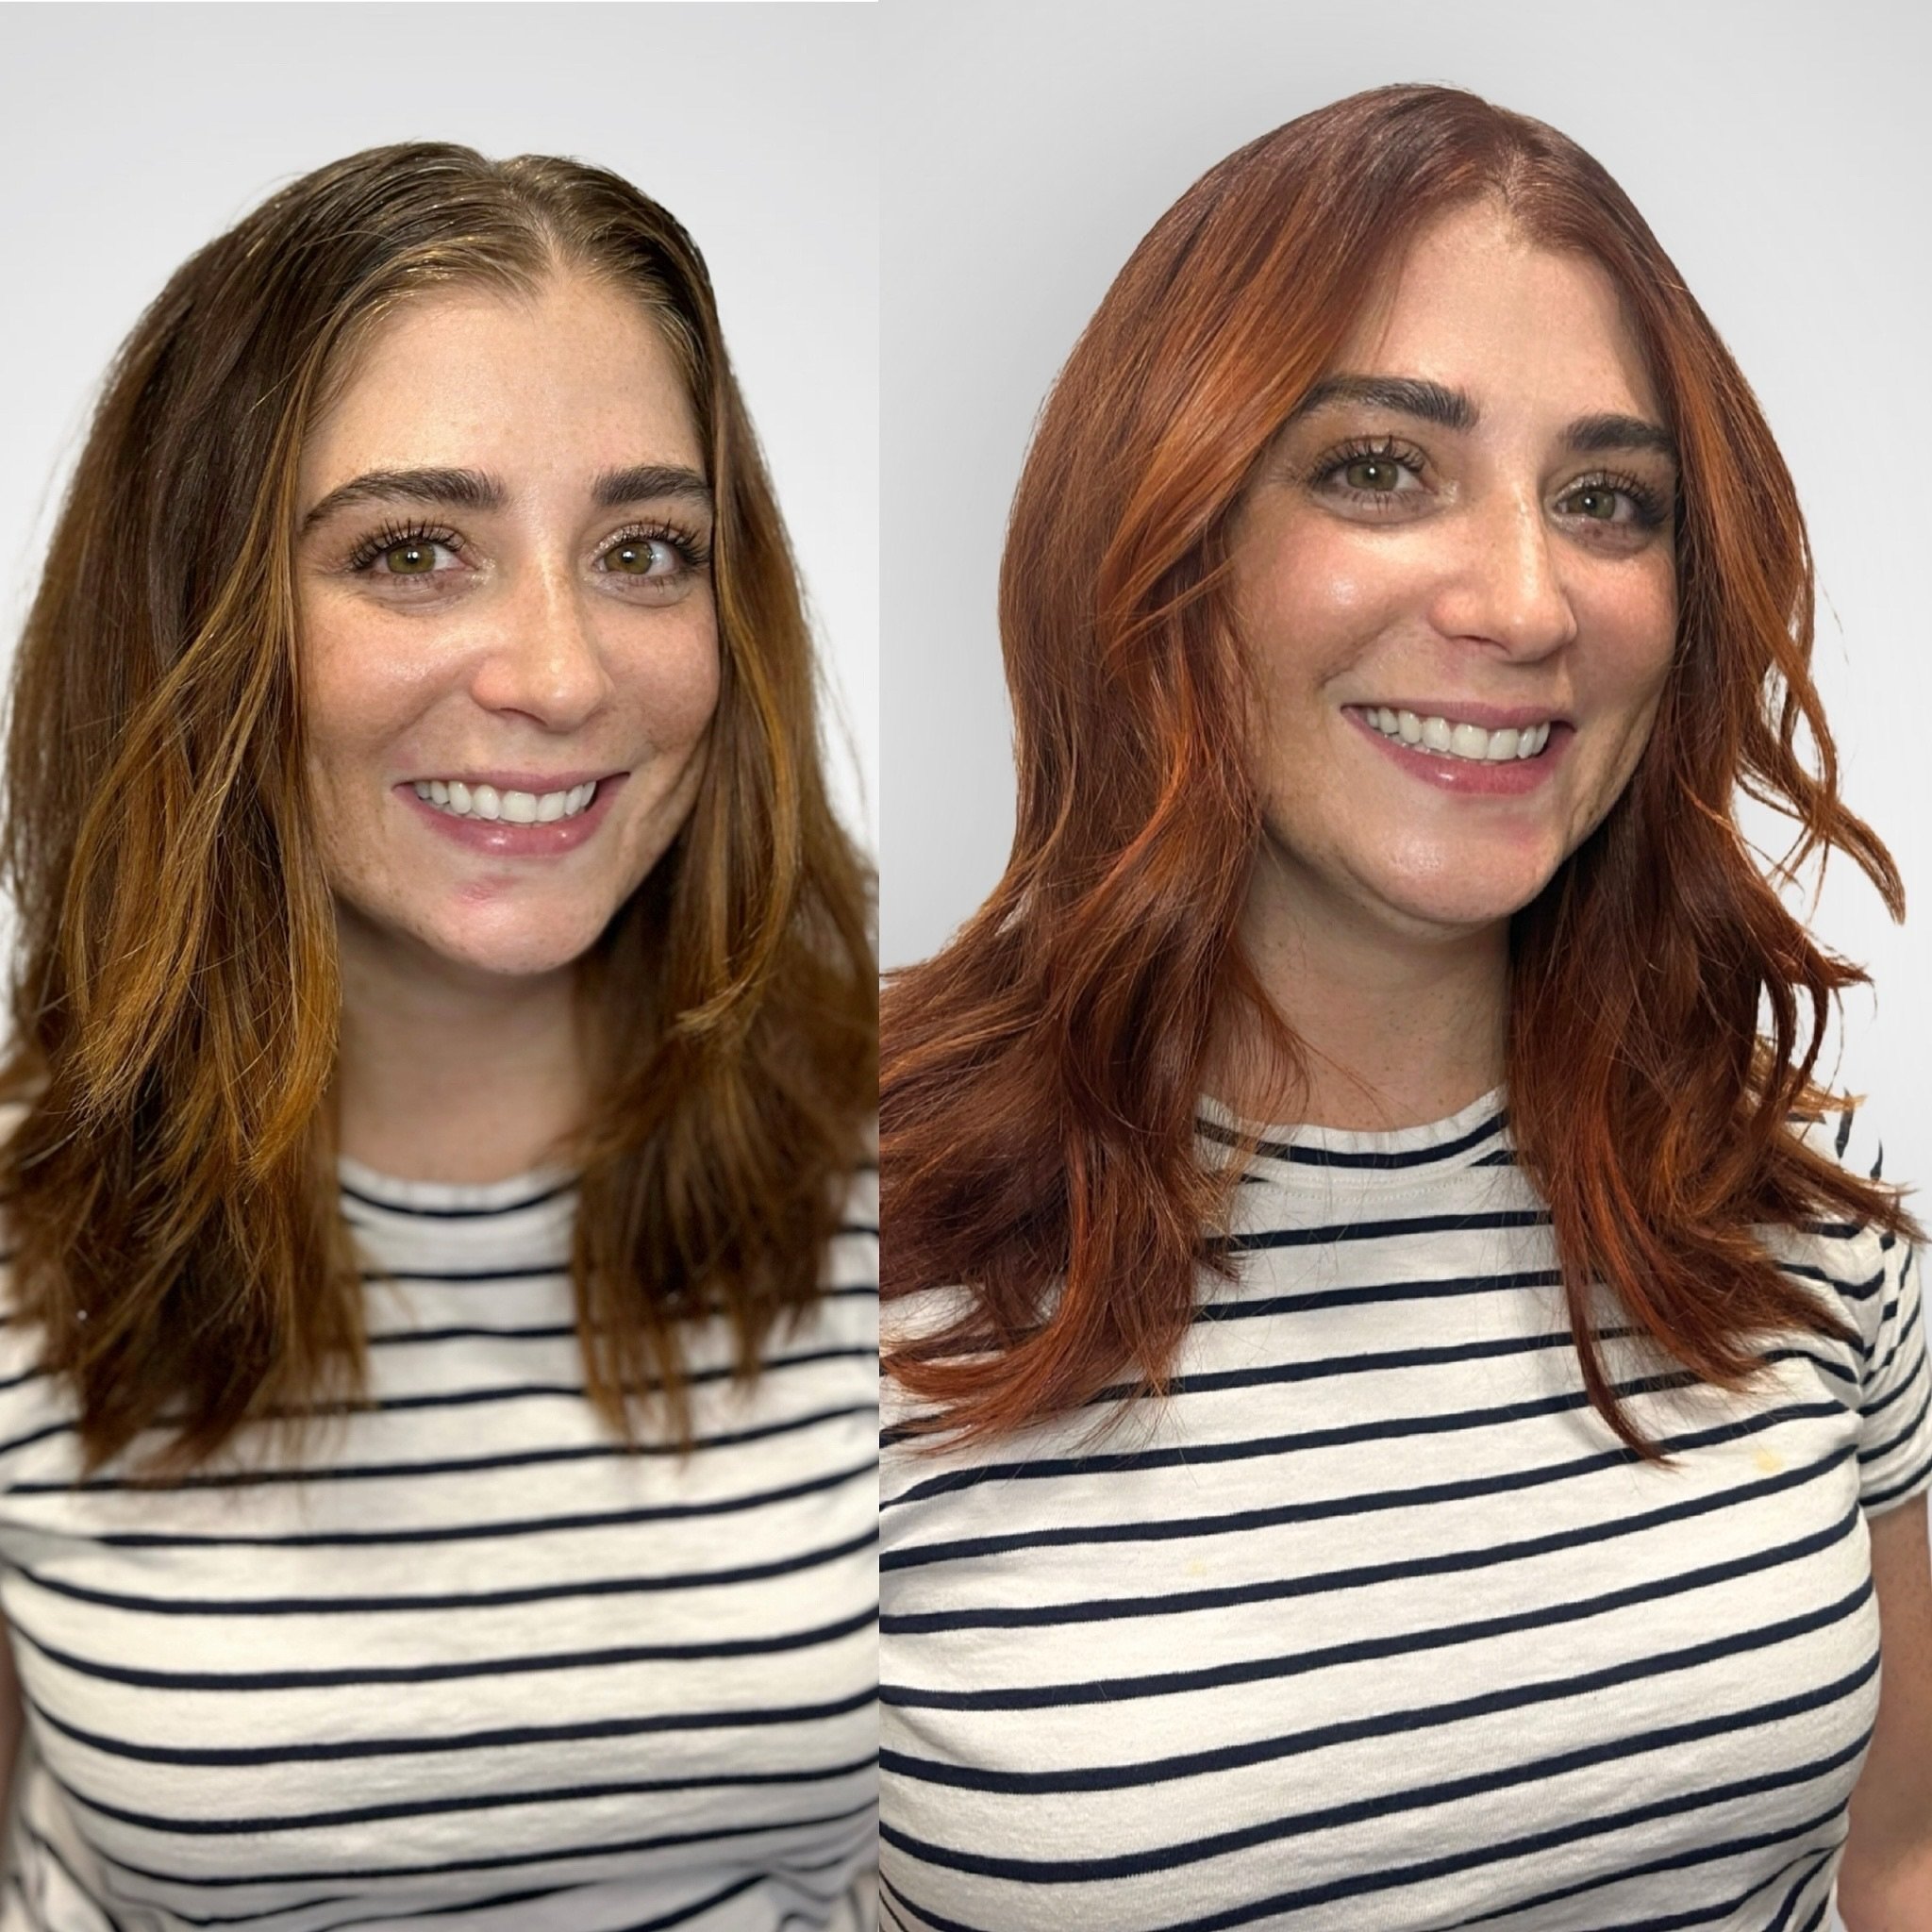 We love a before and after! Here&rsquo;s a summery copper glow up to get your weekend started. Where&rsquo;s your favorite place to go show off a new look after leaving my chair?

#hairinspo #hairinspiration #summerhair #copperhair #beforeandafter #c